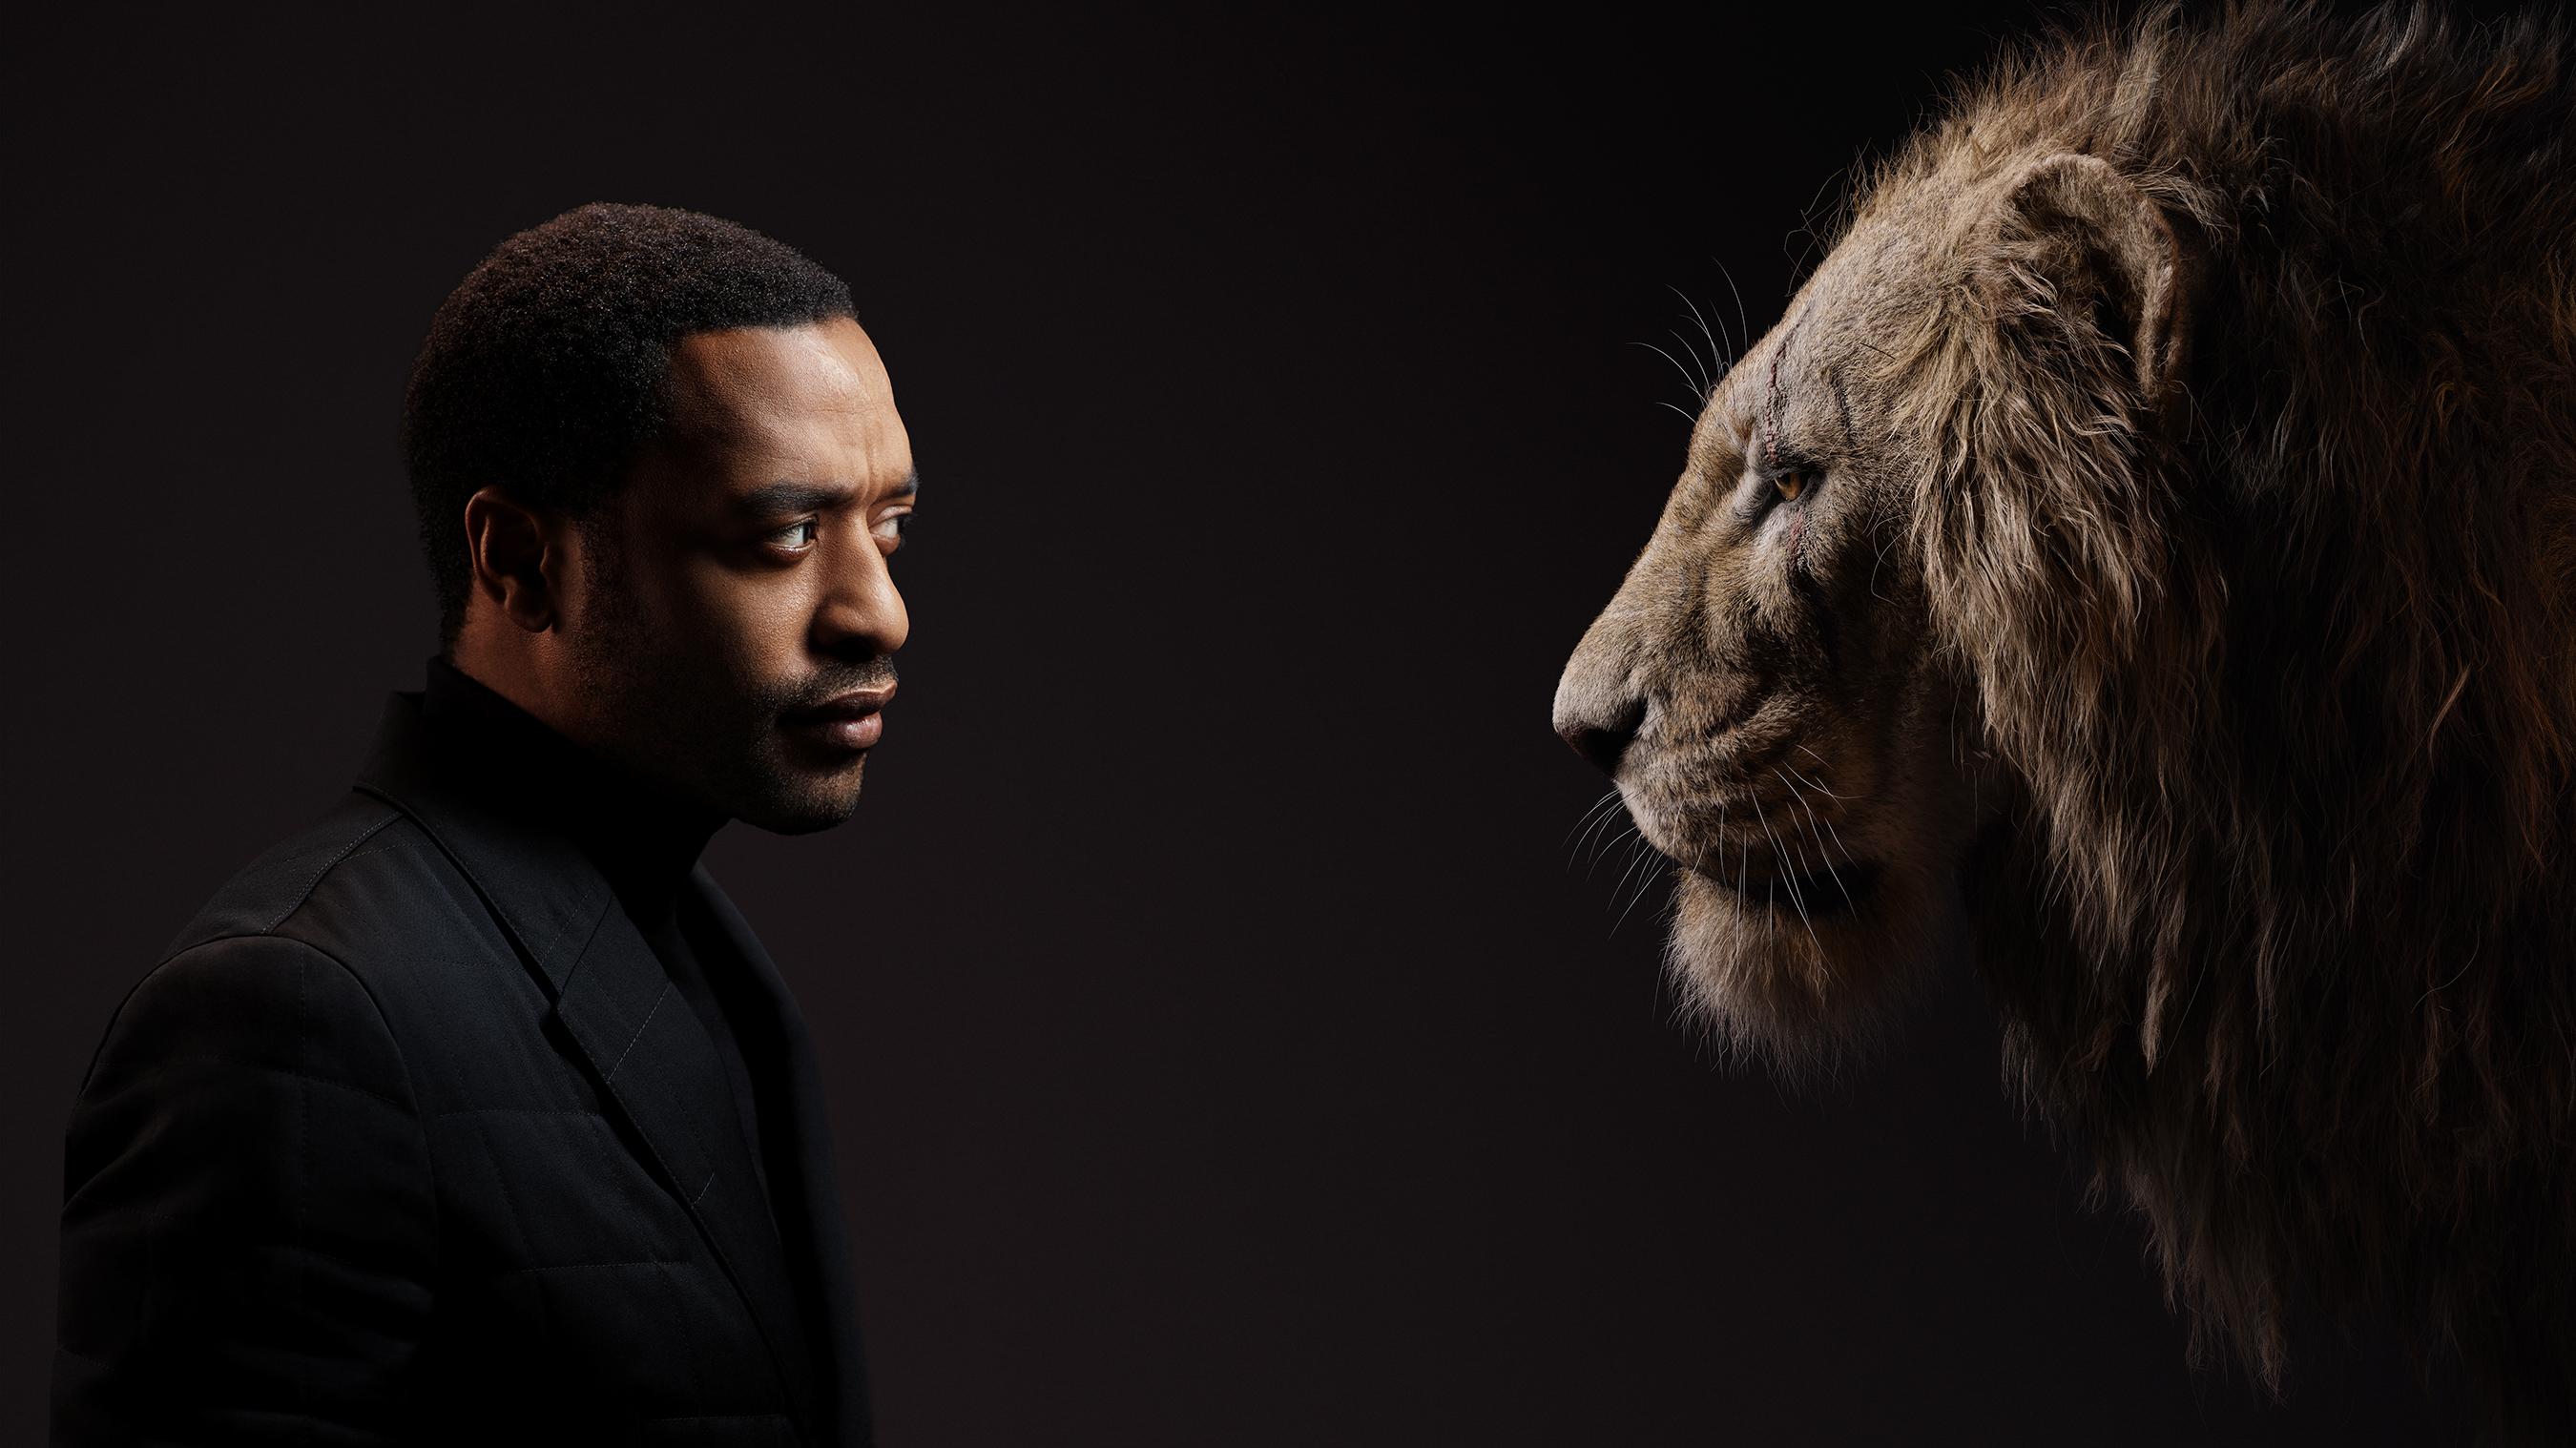 THE LION KING, Chiwetel Ejiofor